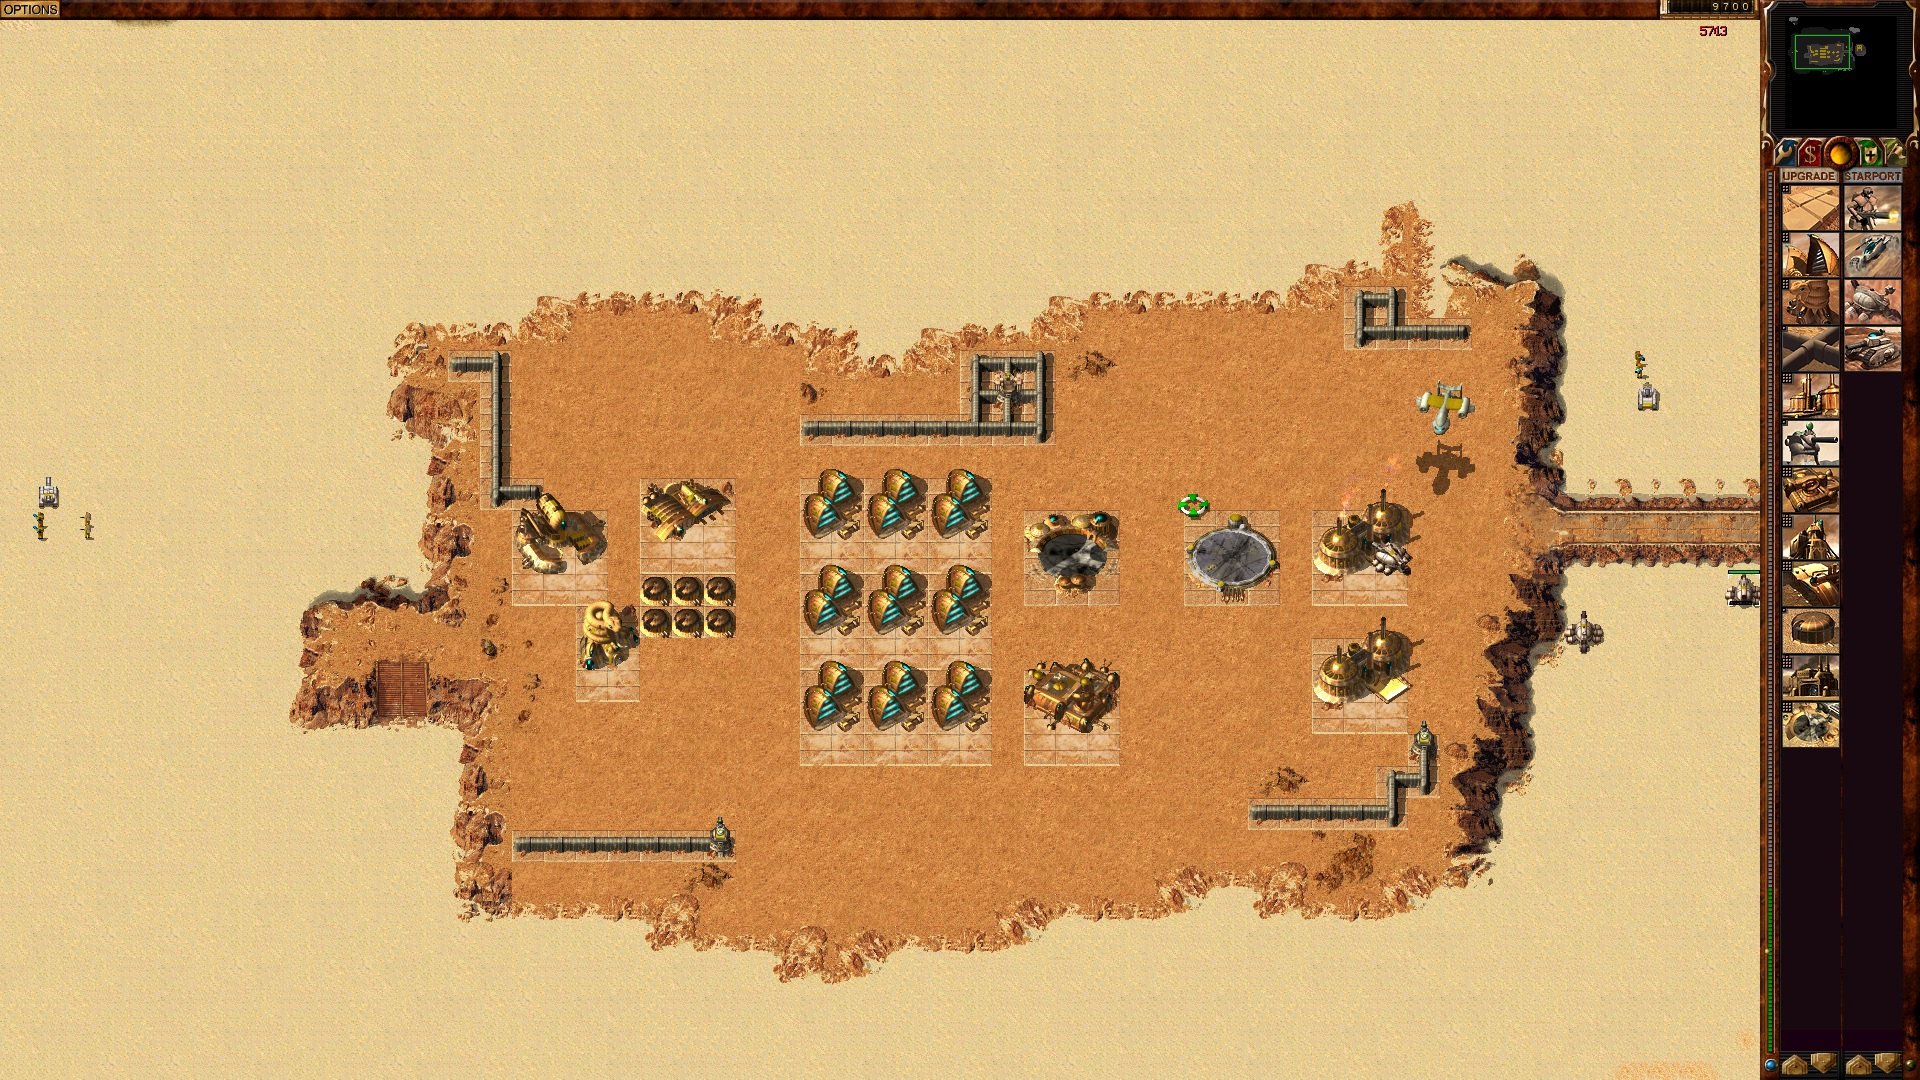 A screenshot from Dune 2000 video game. (Photo courtesy of Electronic Arts)